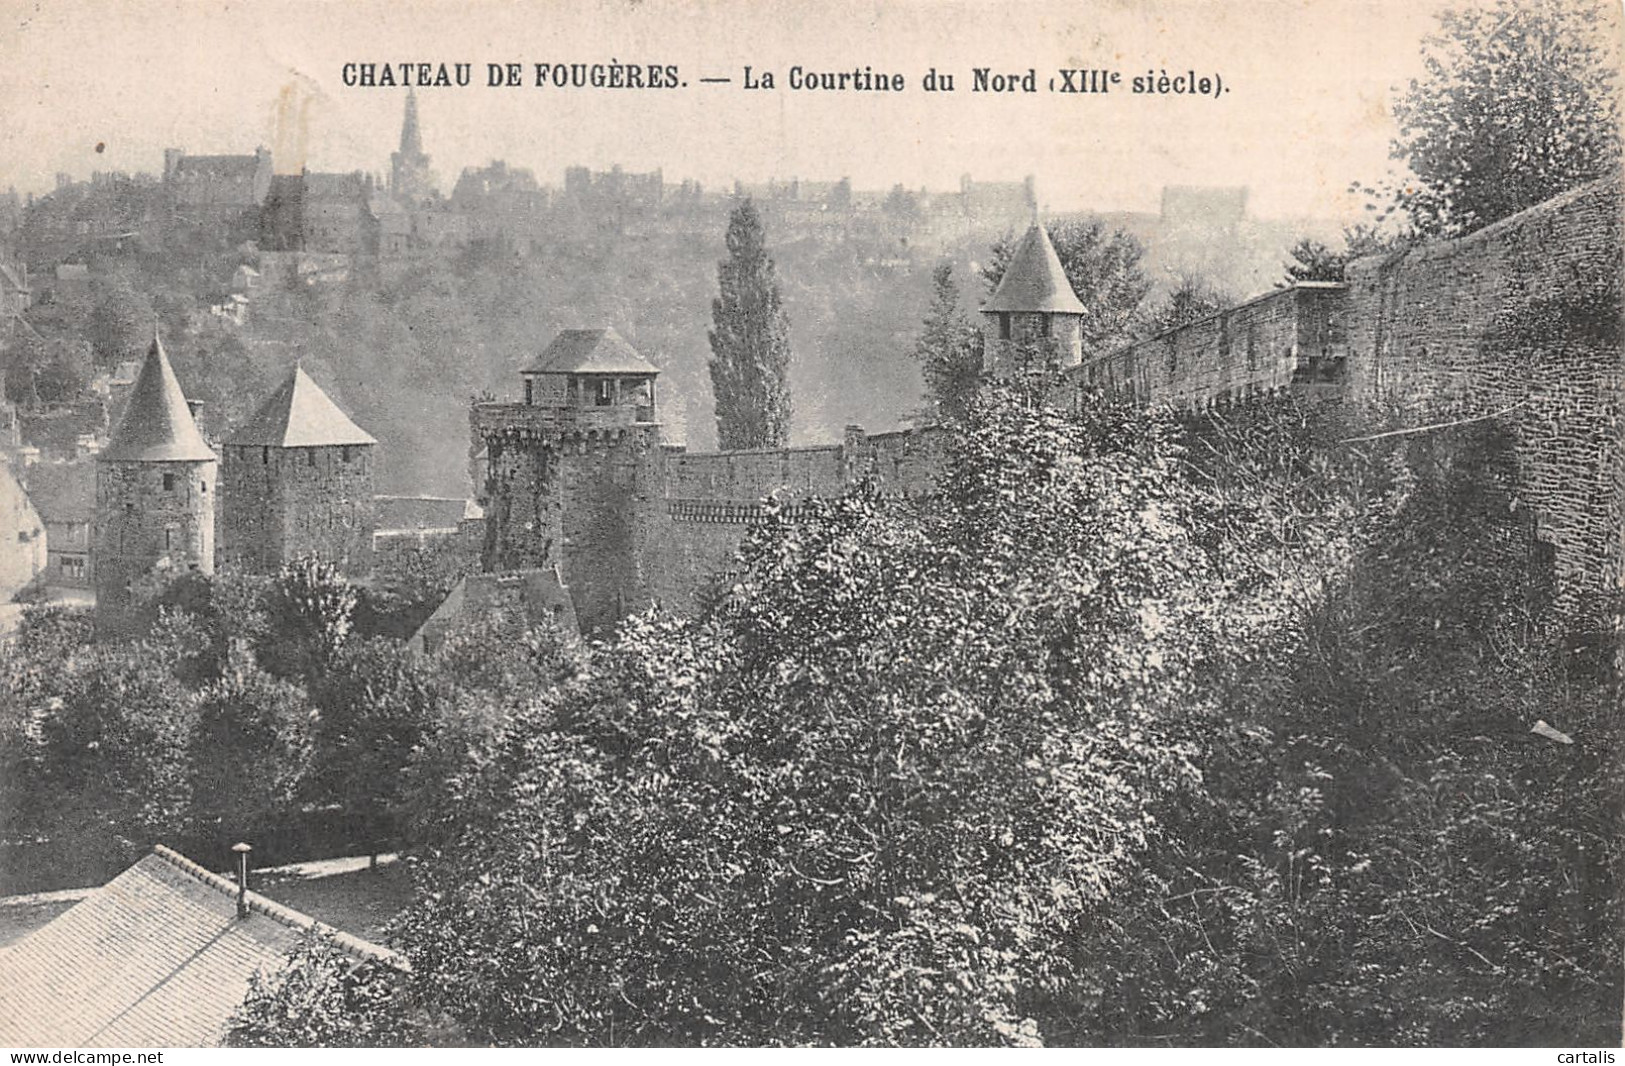 35-FOUGERES LE CHATEAU-N°4224-C/0175 - Fougeres